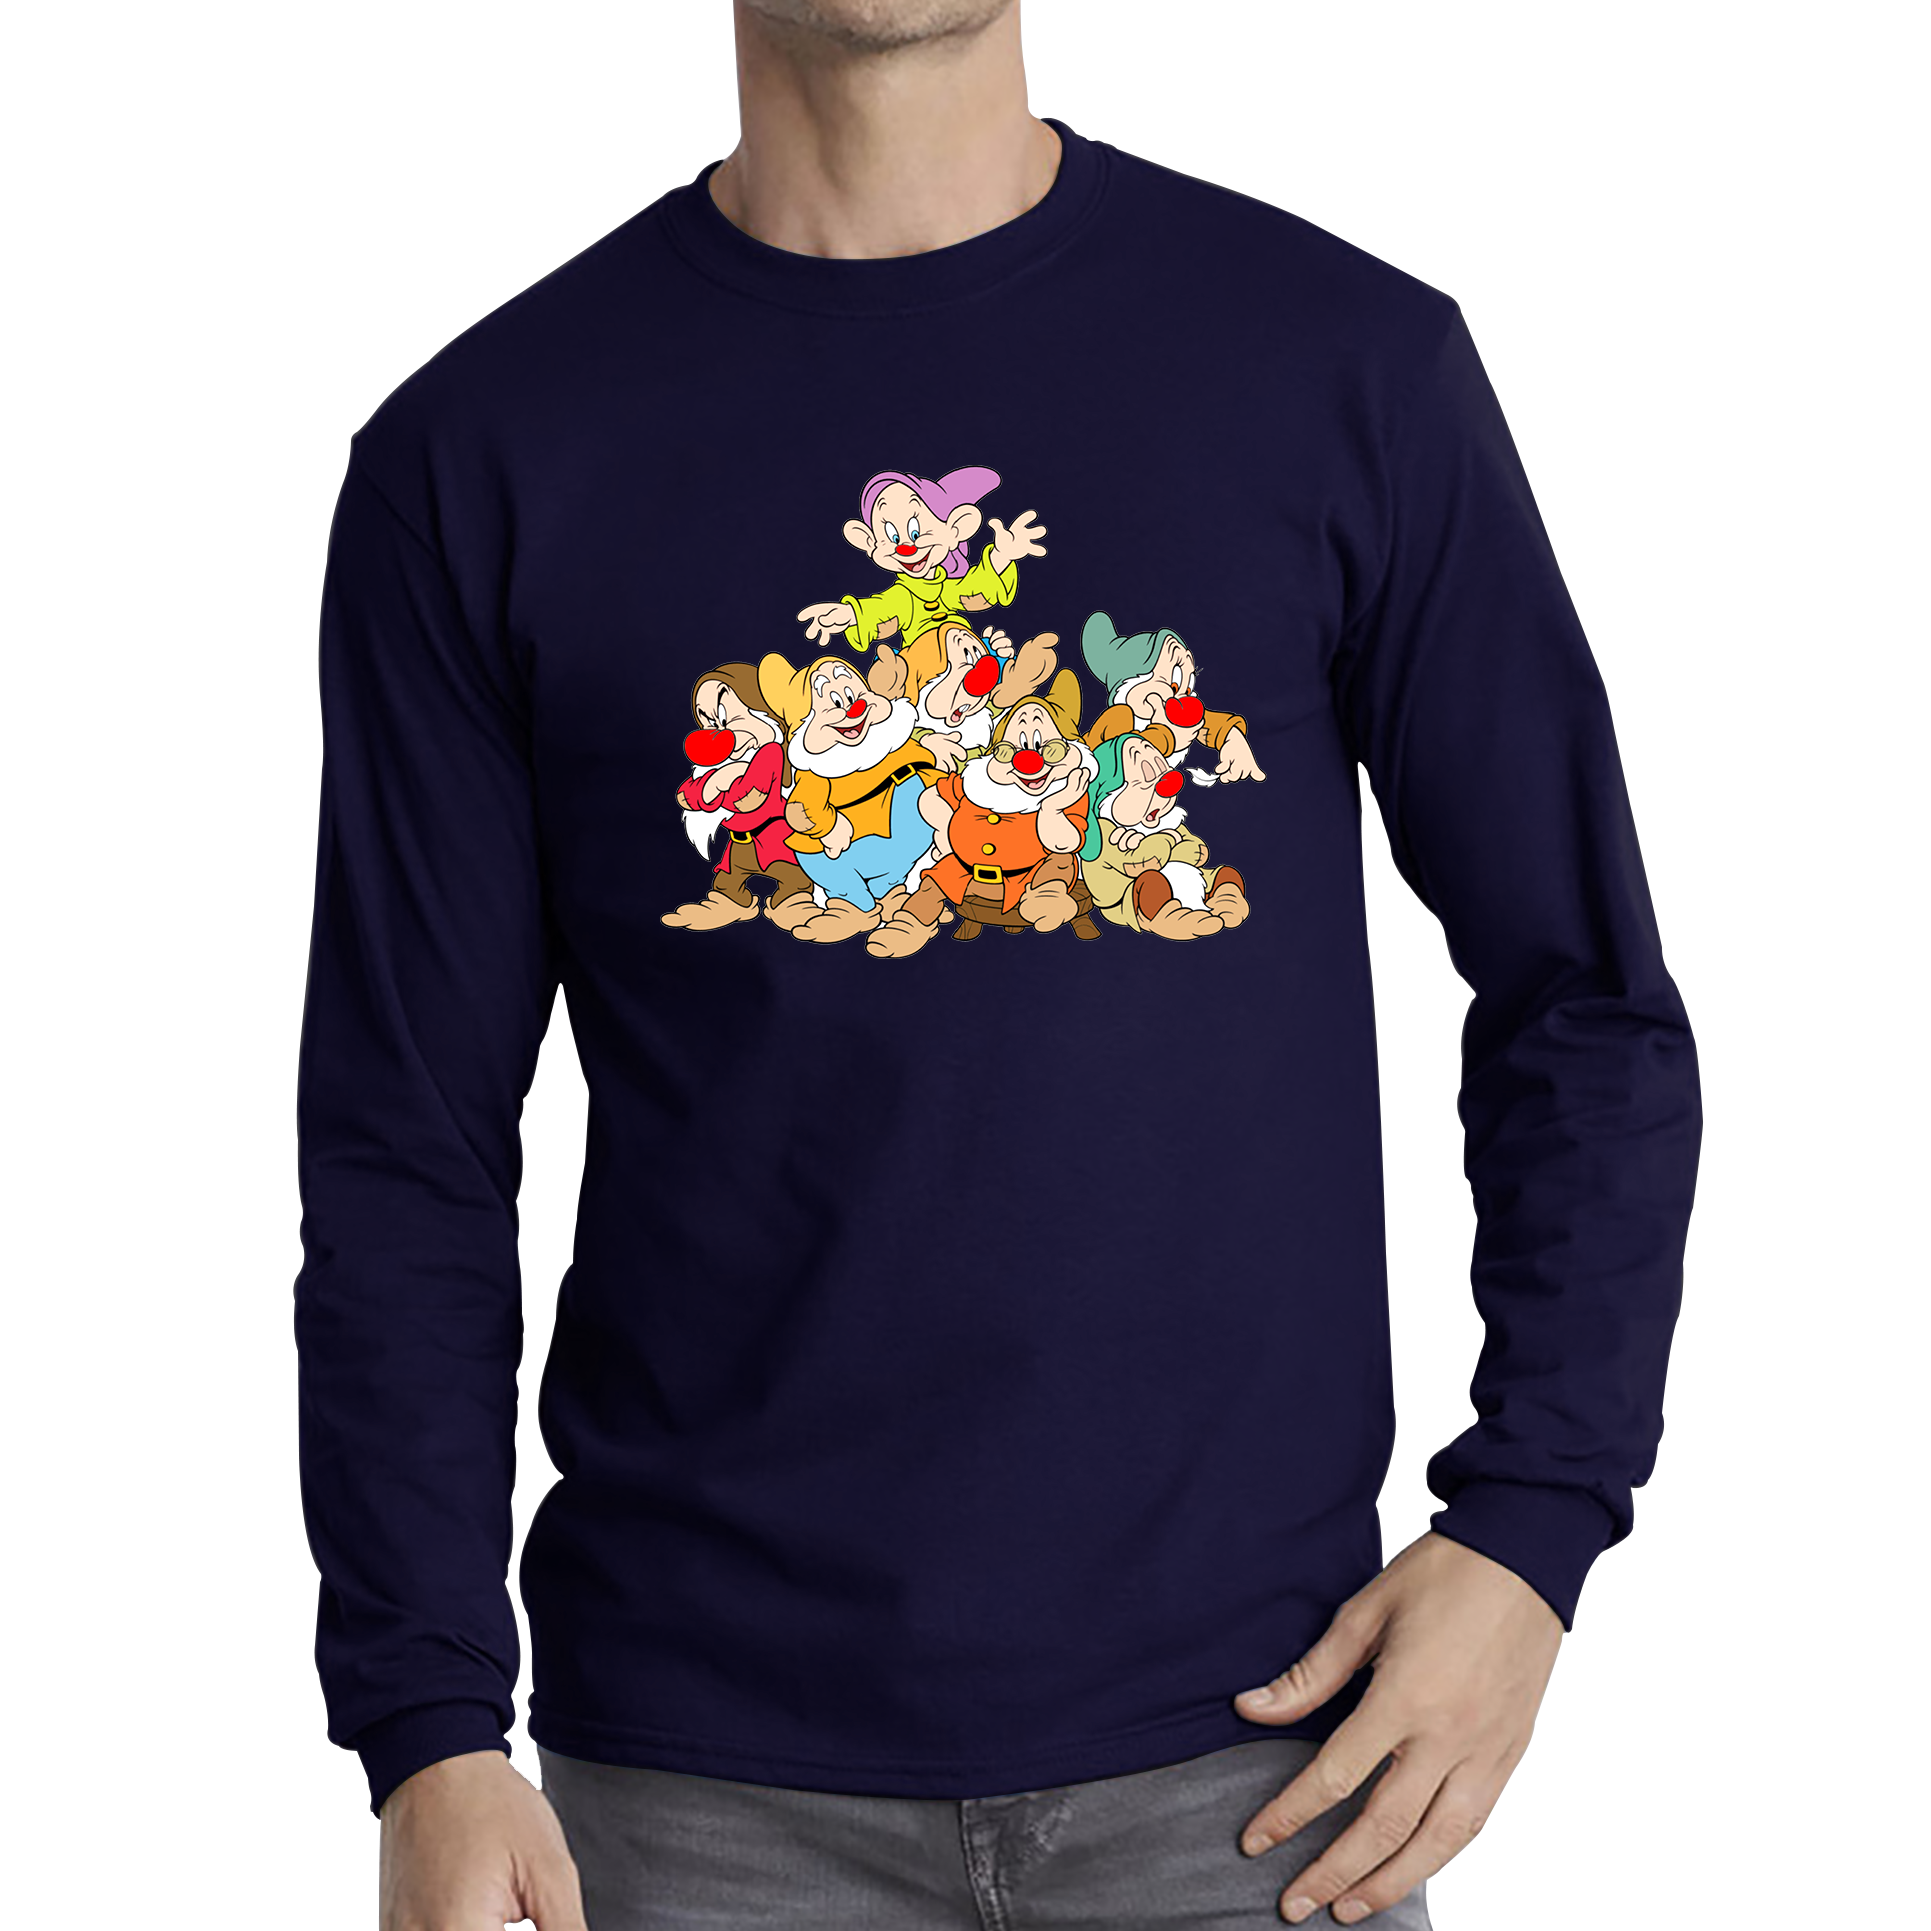 Disney Snow White and Seven Dwarfs Red Nose Day Adult Long Sleeve T Shirt. 50% Goes To Charity